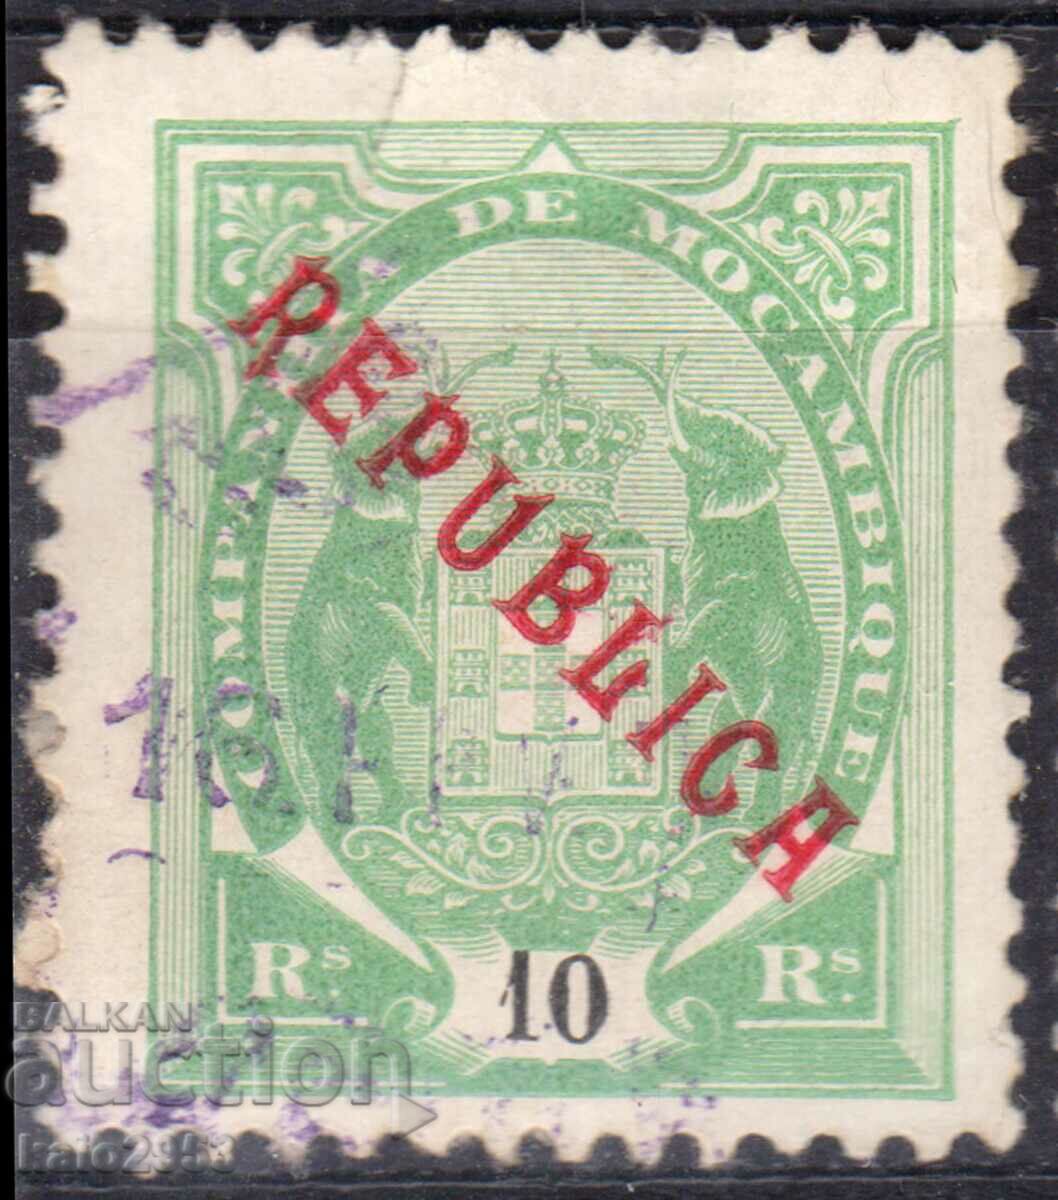 Mozambique Company-1911-Regular-Coat of arms with superscript "REPUBLICA", stamp